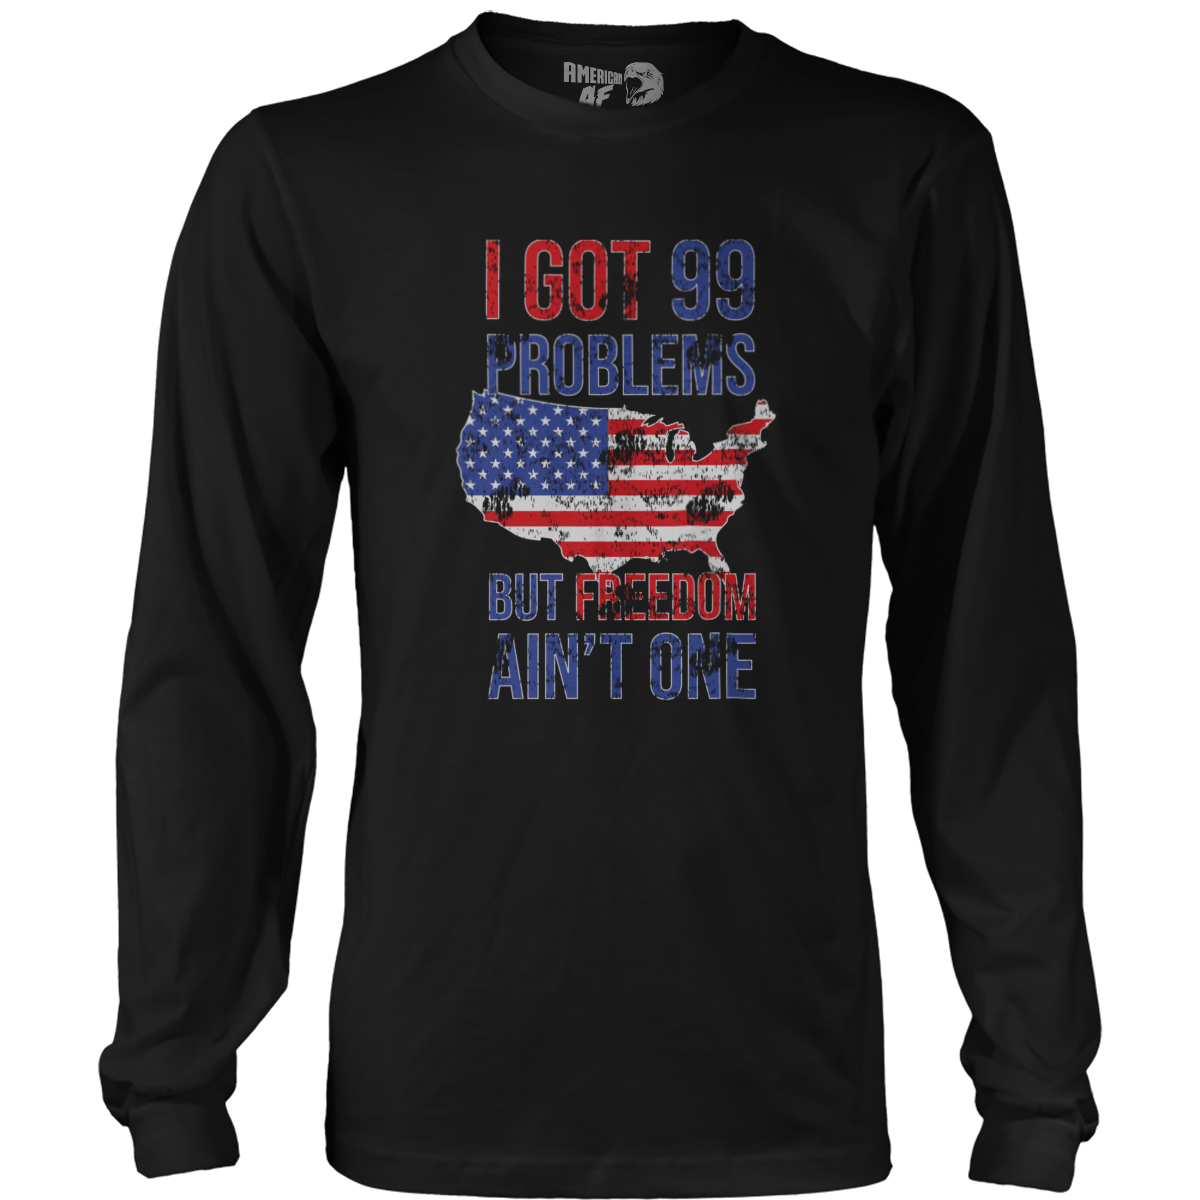 T-shirt Mens Long Sleeve / Black / S I Got 99 Problems But Freedom Ain't One